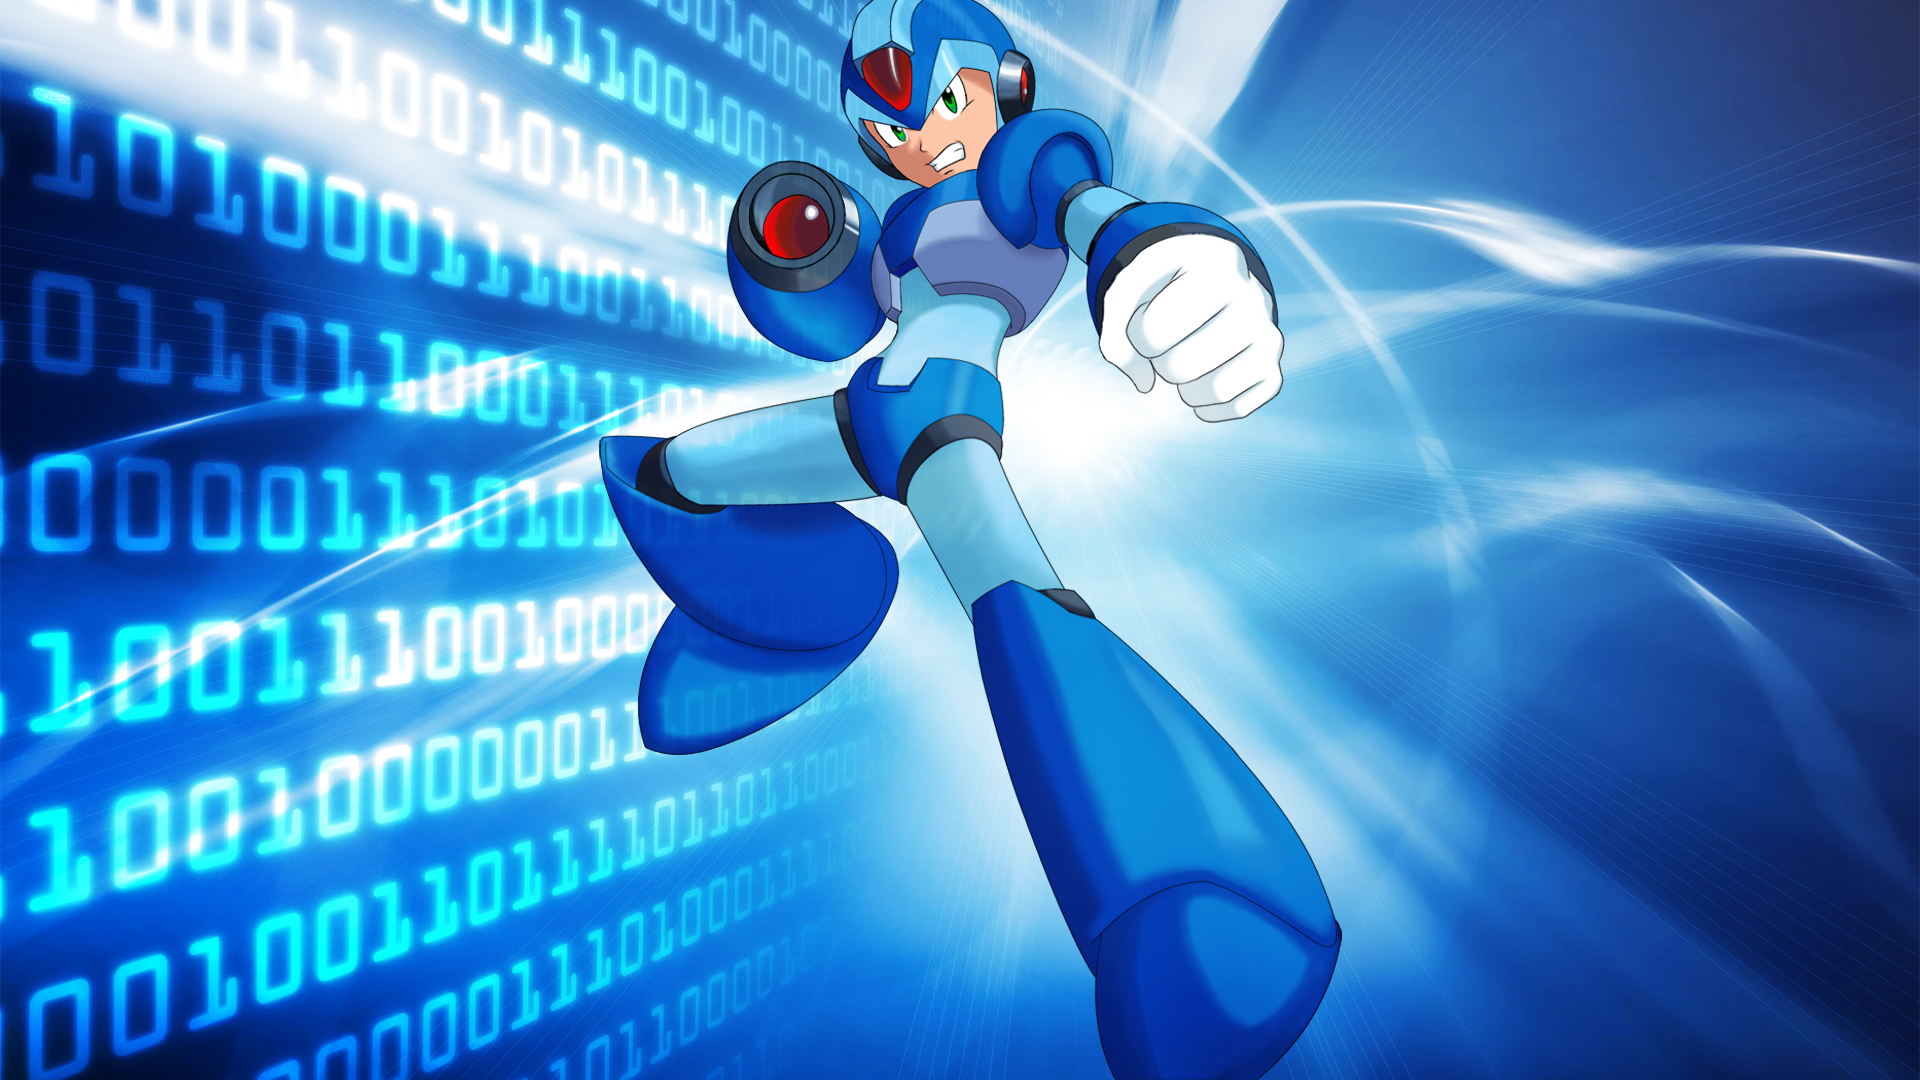 Mega Man X Background By Pookandpie